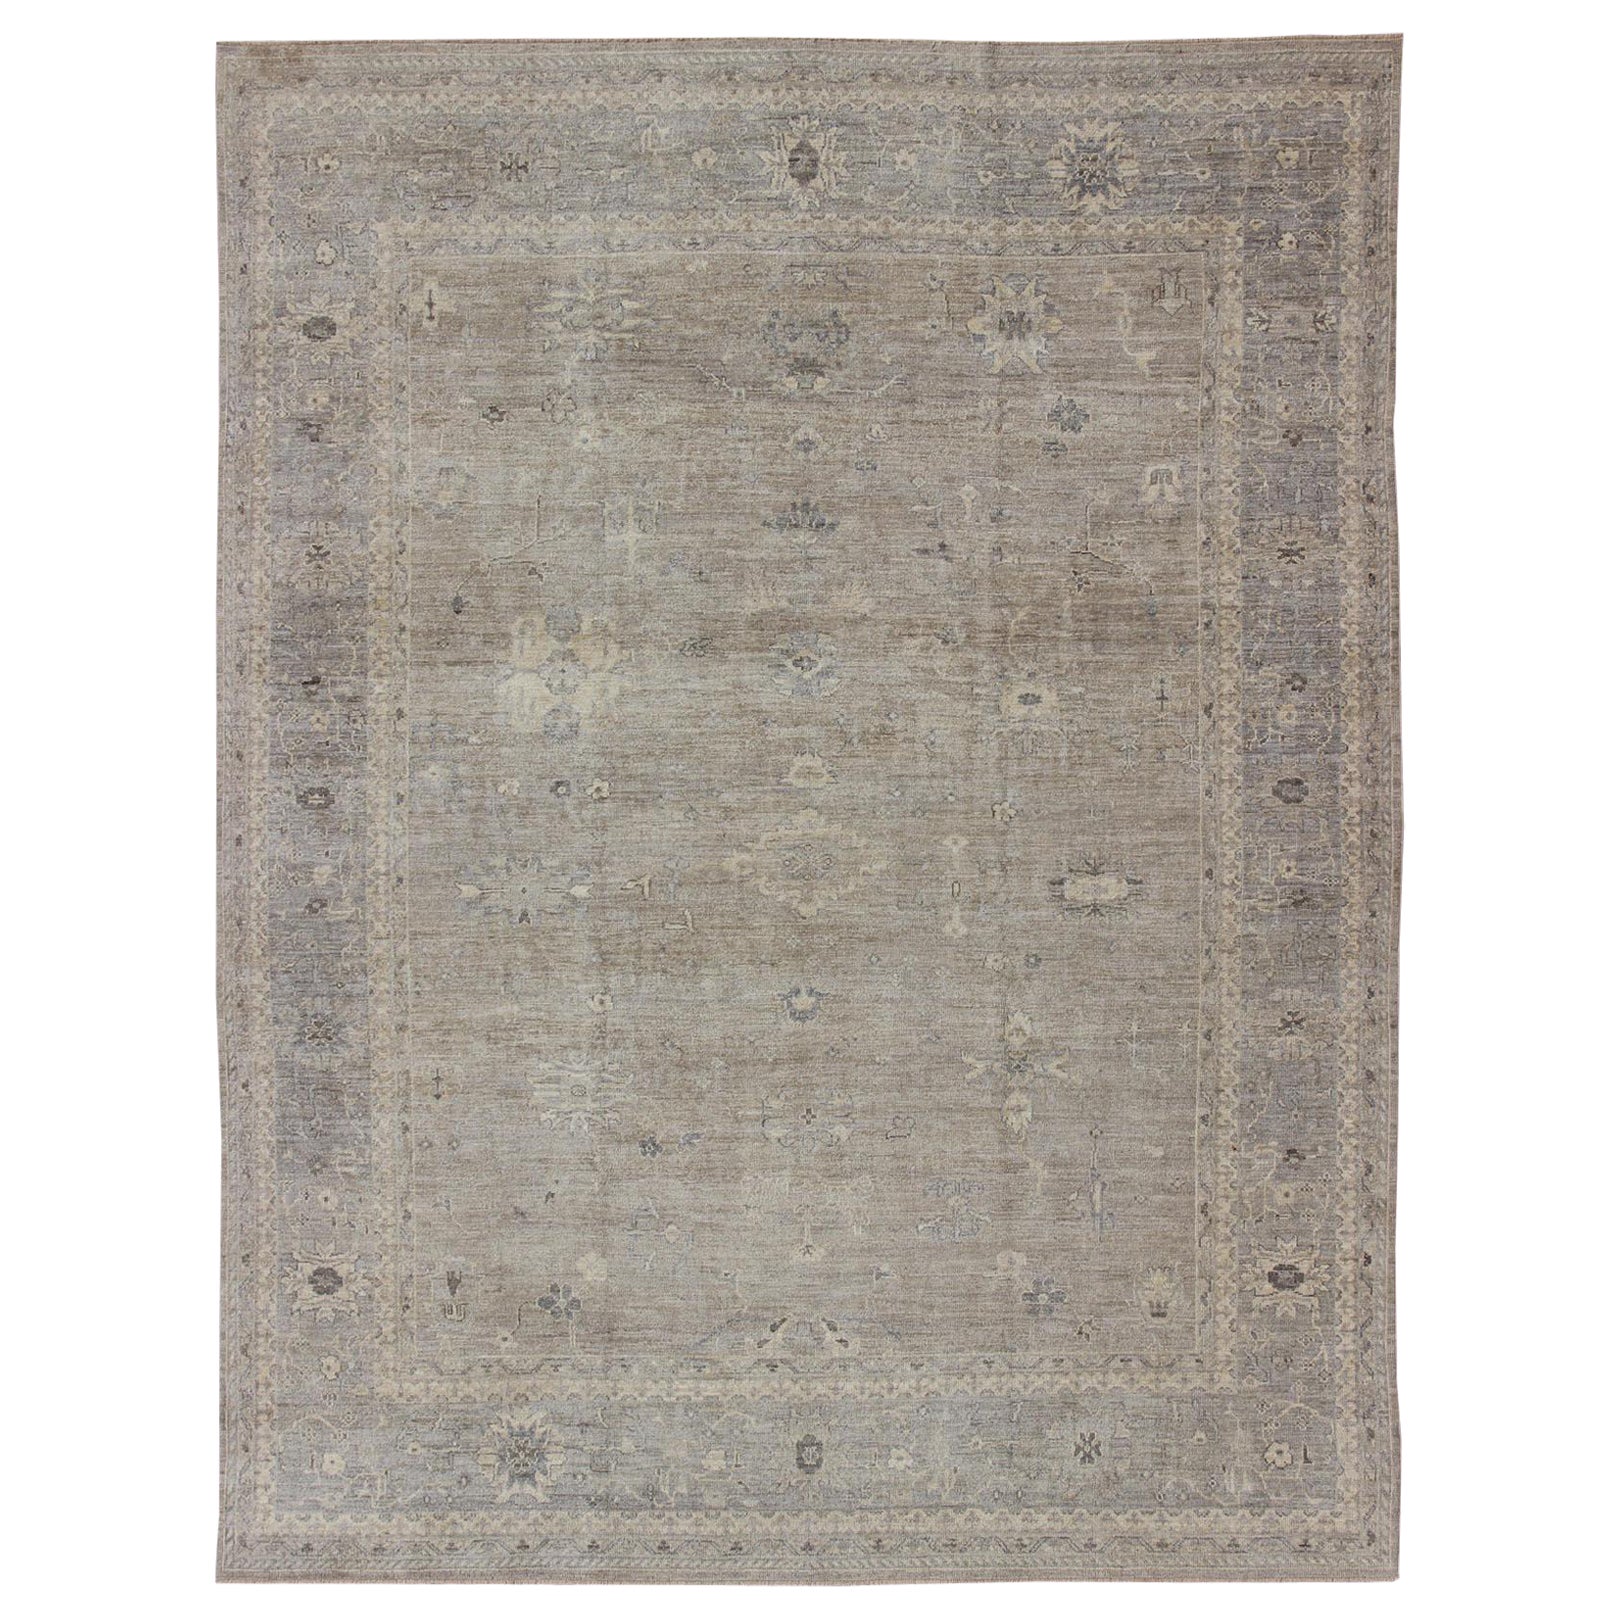 Large Turkish Oushak Rug with Pastel Colors and Botanical Design For Sale